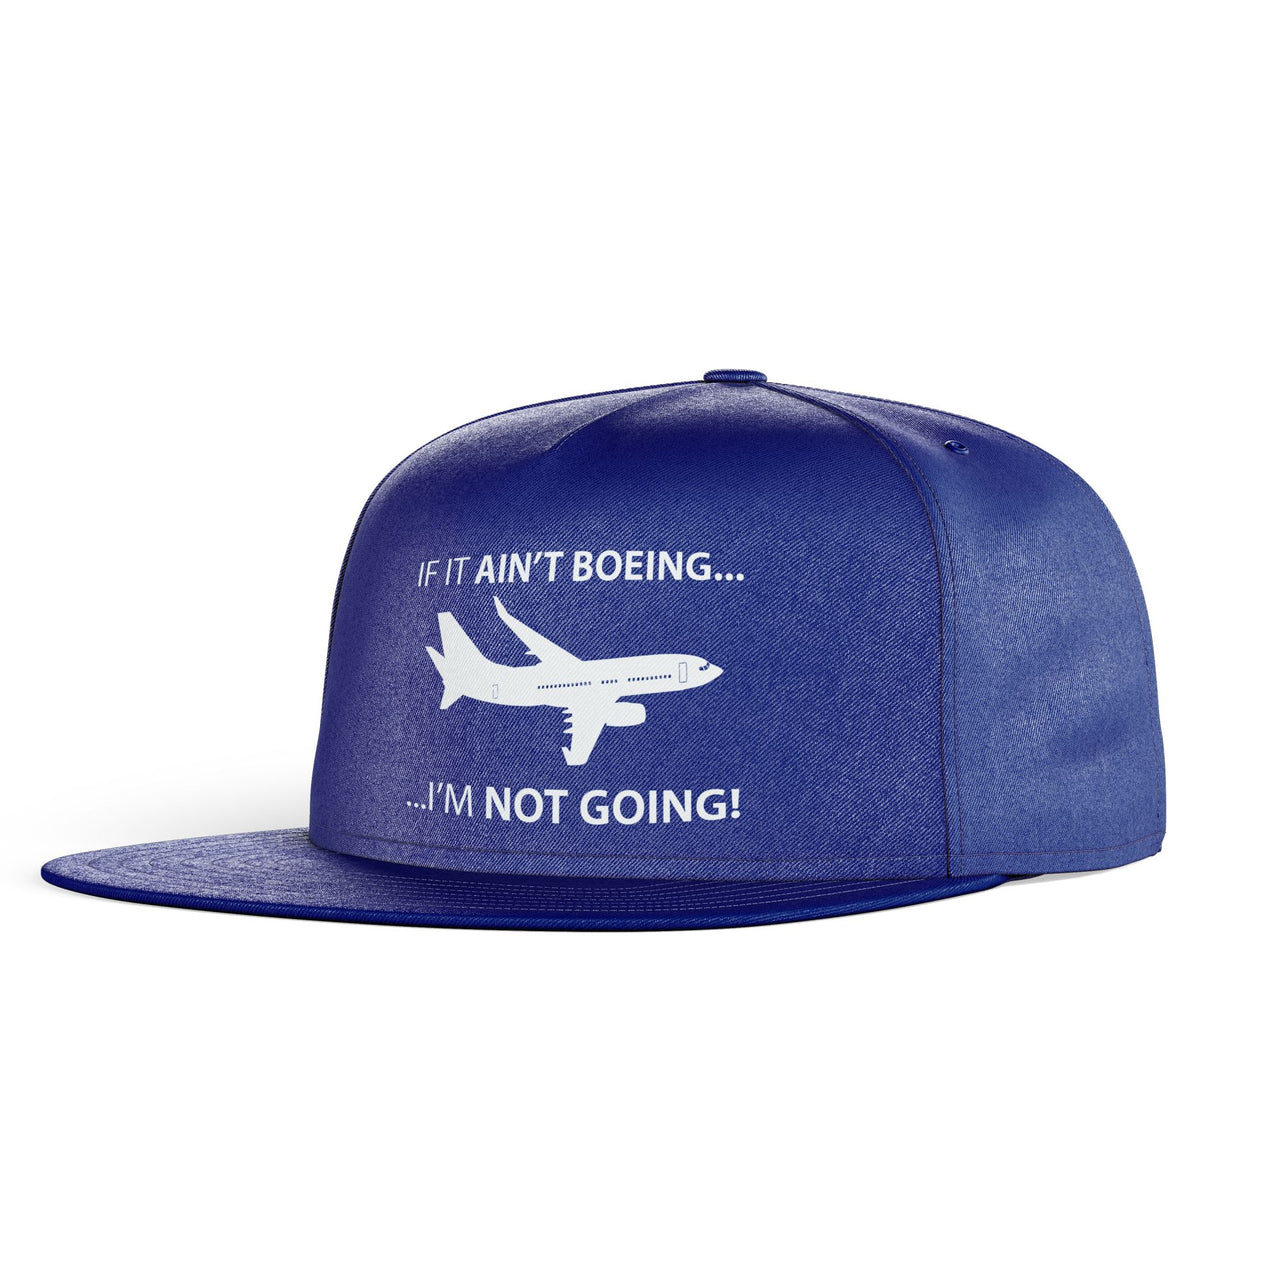 If It Ain't Boeing I'm Not Going! Designed Snapback Caps & Hats